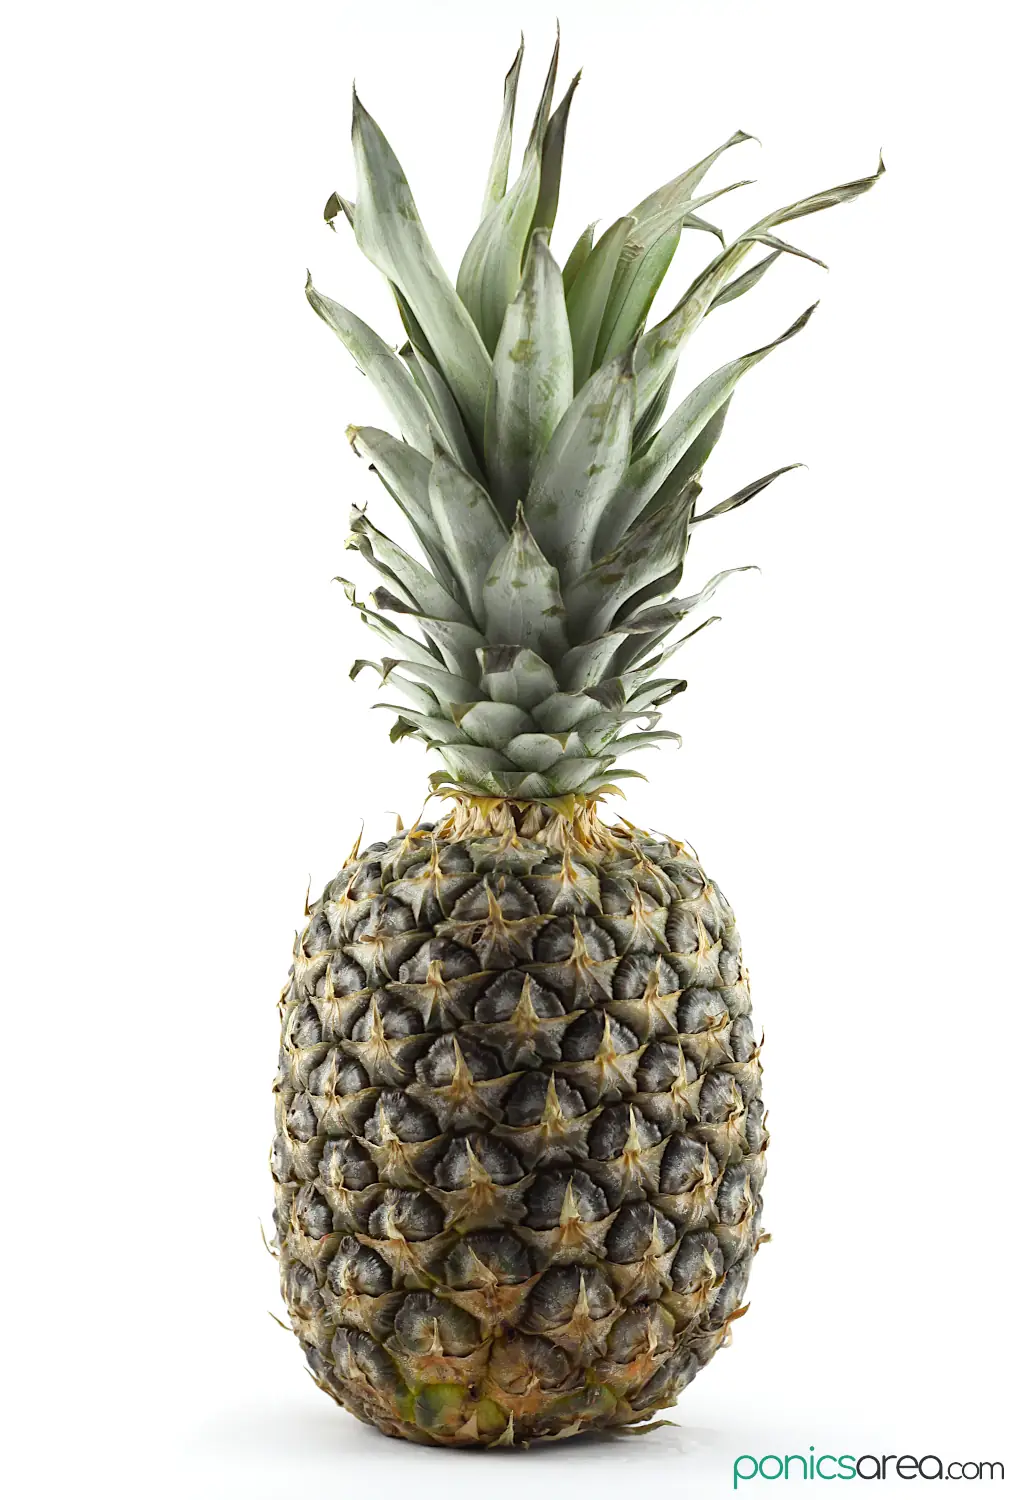 pineapples grow in 2-3 years